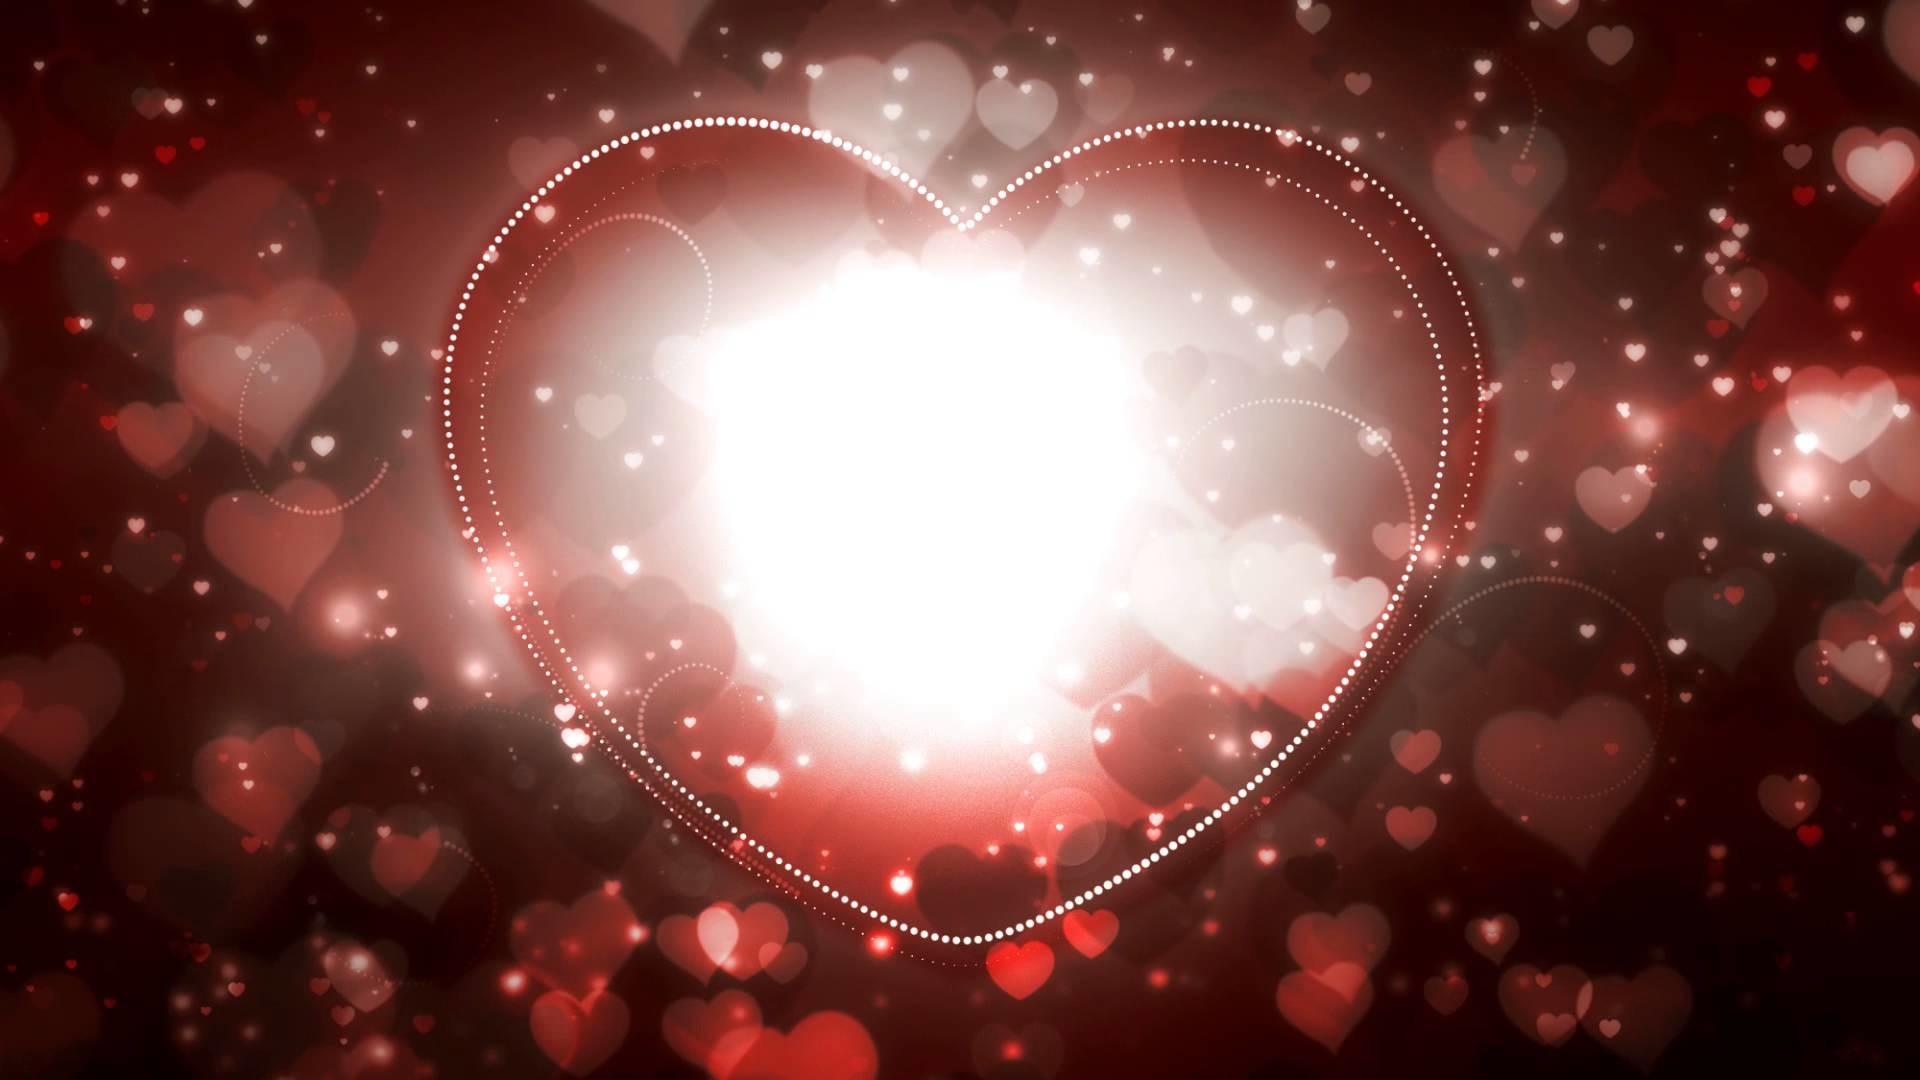 1920x1080 love background hd images 6